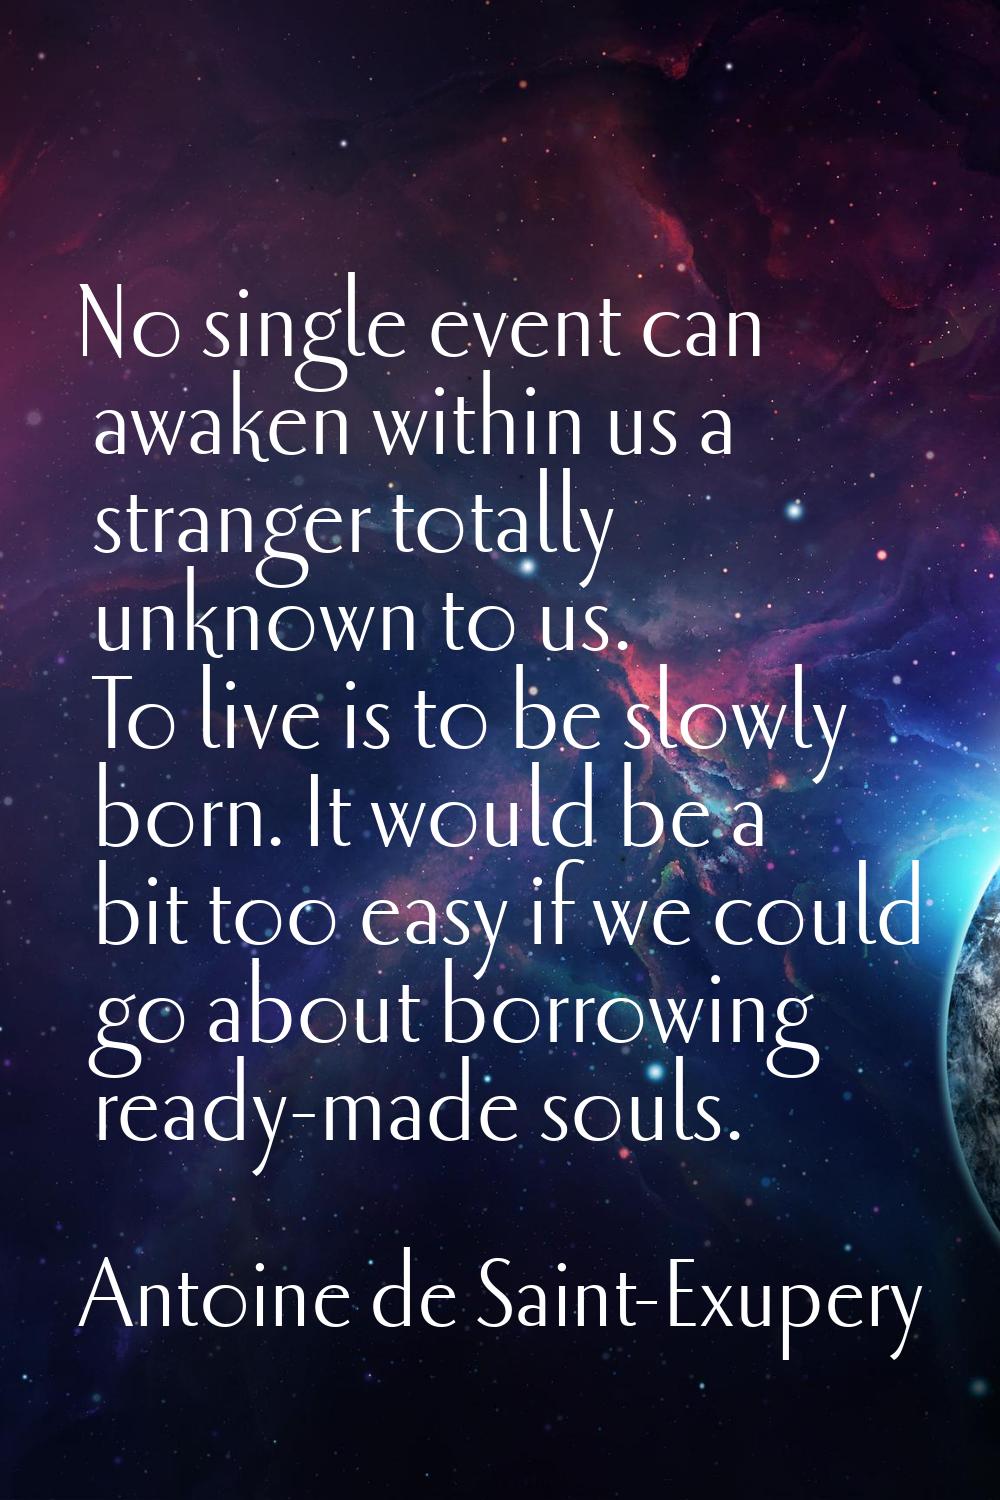 No single event can awaken within us a stranger totally unknown to us. To live is to be slowly born